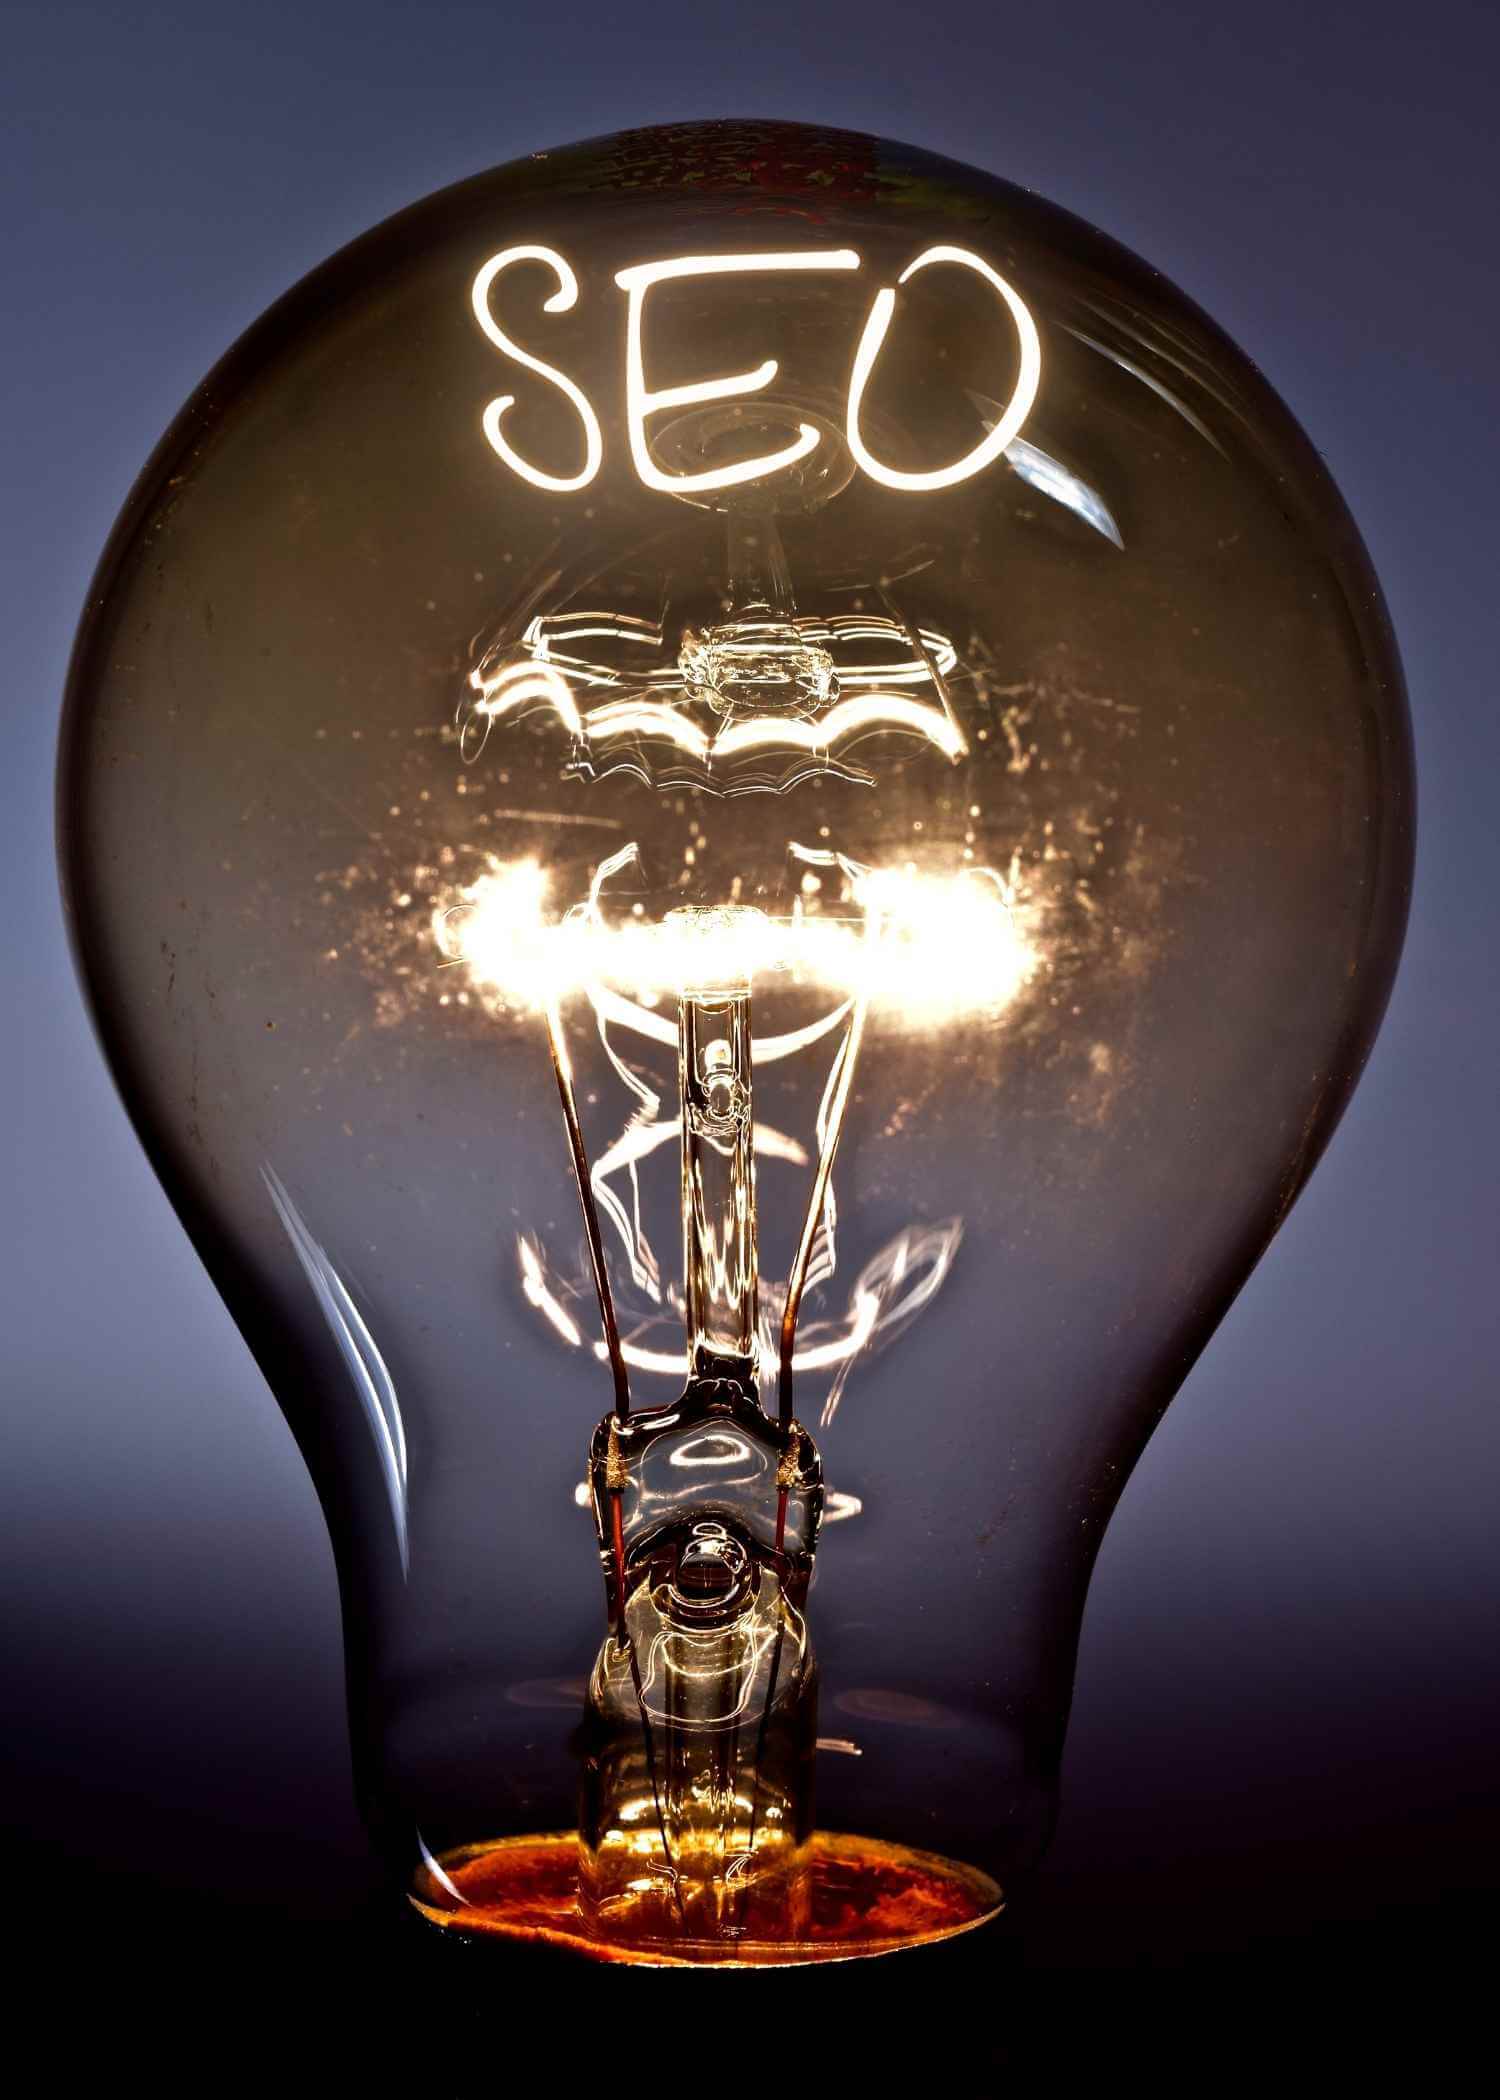 The word SEO lit up in a turned on lighted up lightglobe